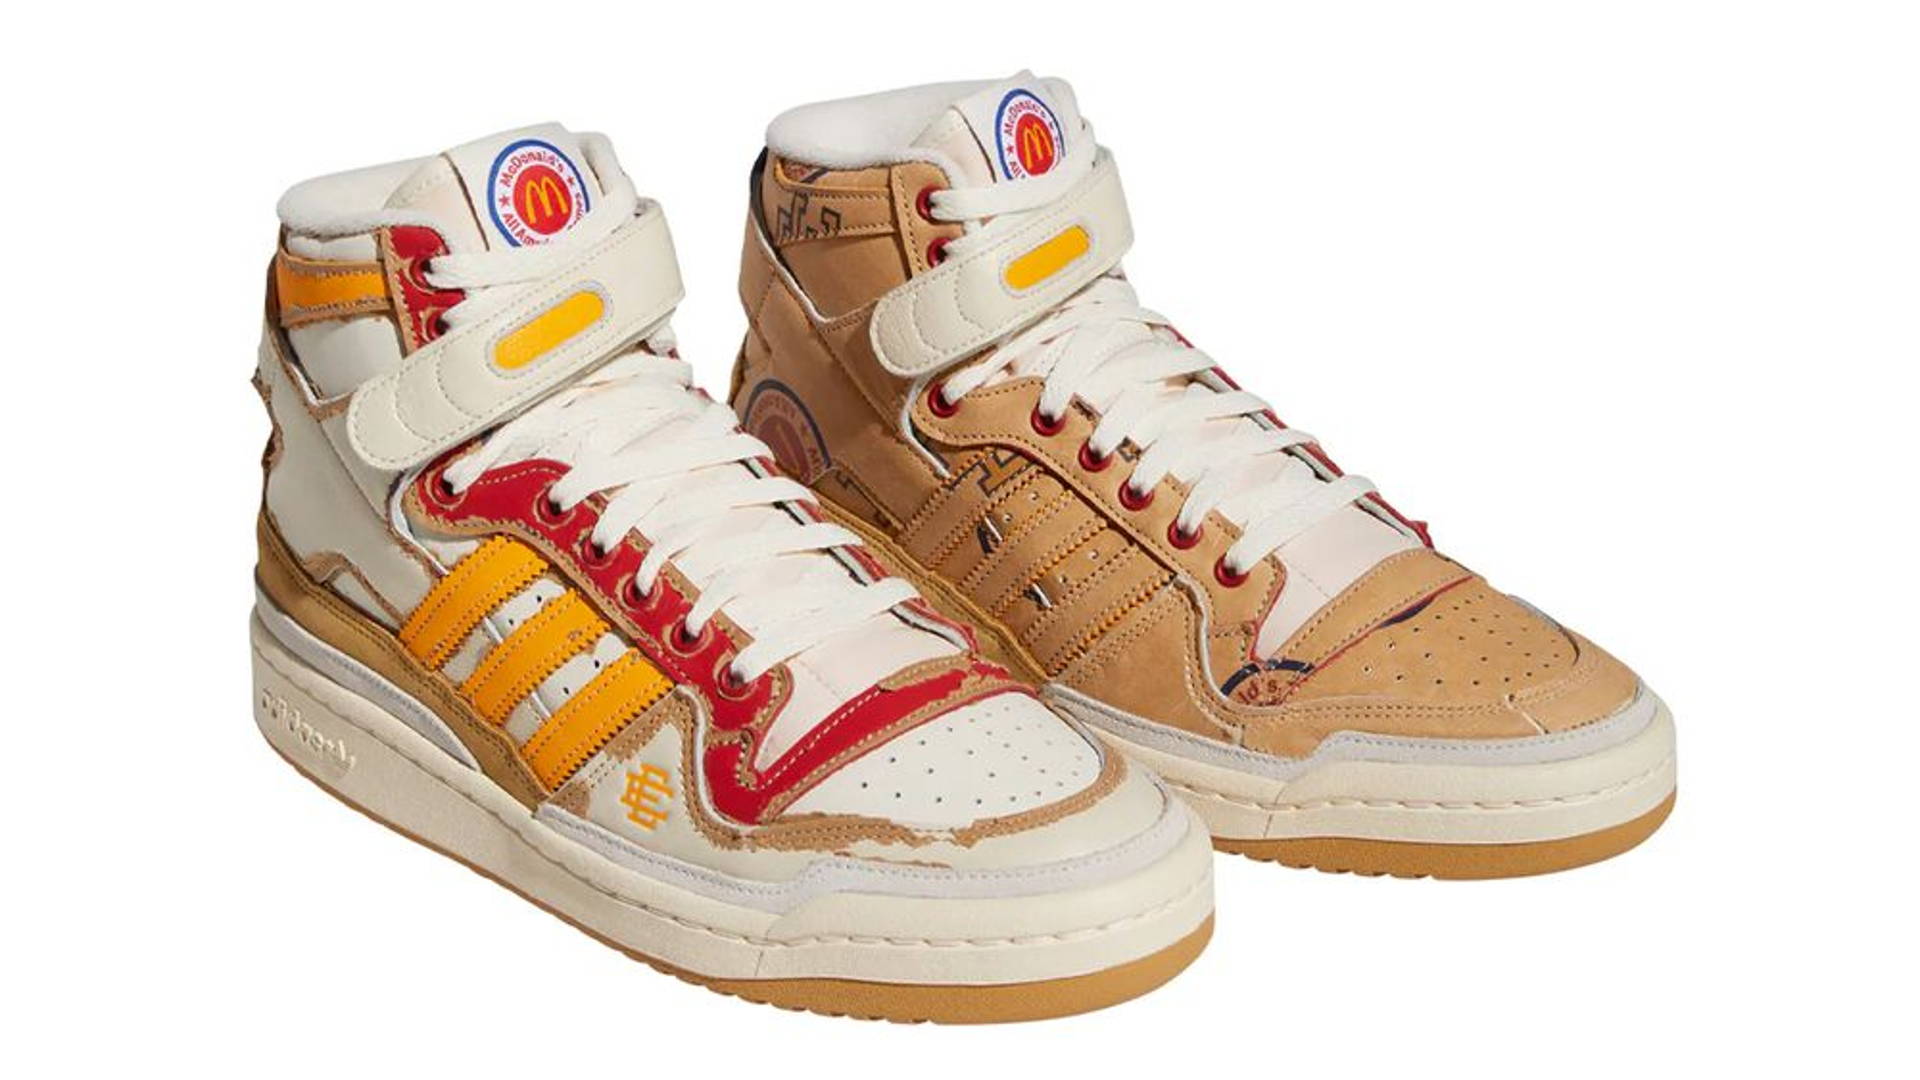 Eric Emanuel Collaborates With McDonald's And Adidas To Reimagine